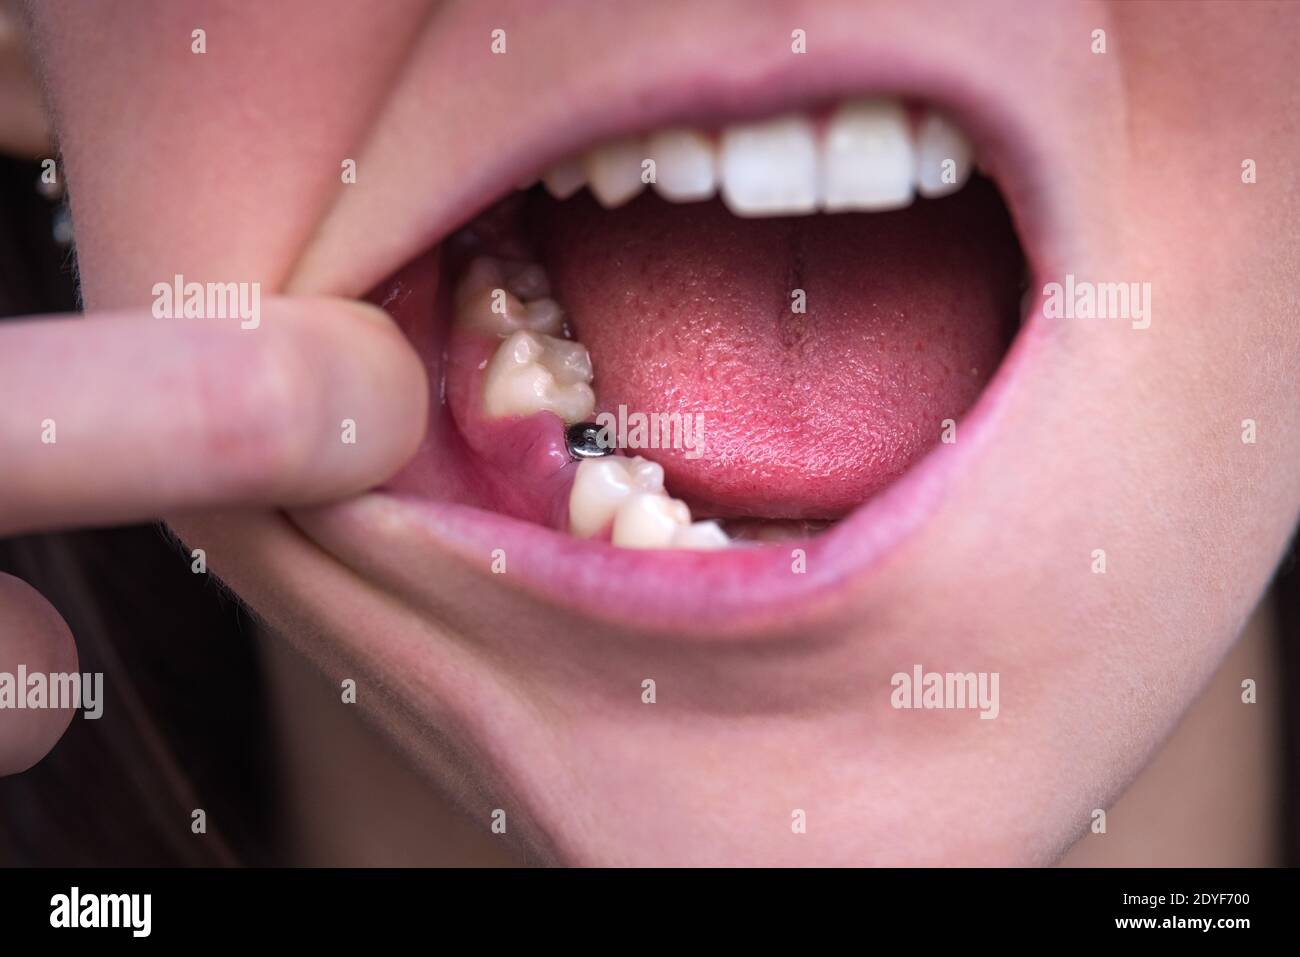 Single tooth implant. Missing tooth. Implant after tooth extraction Stock Photo